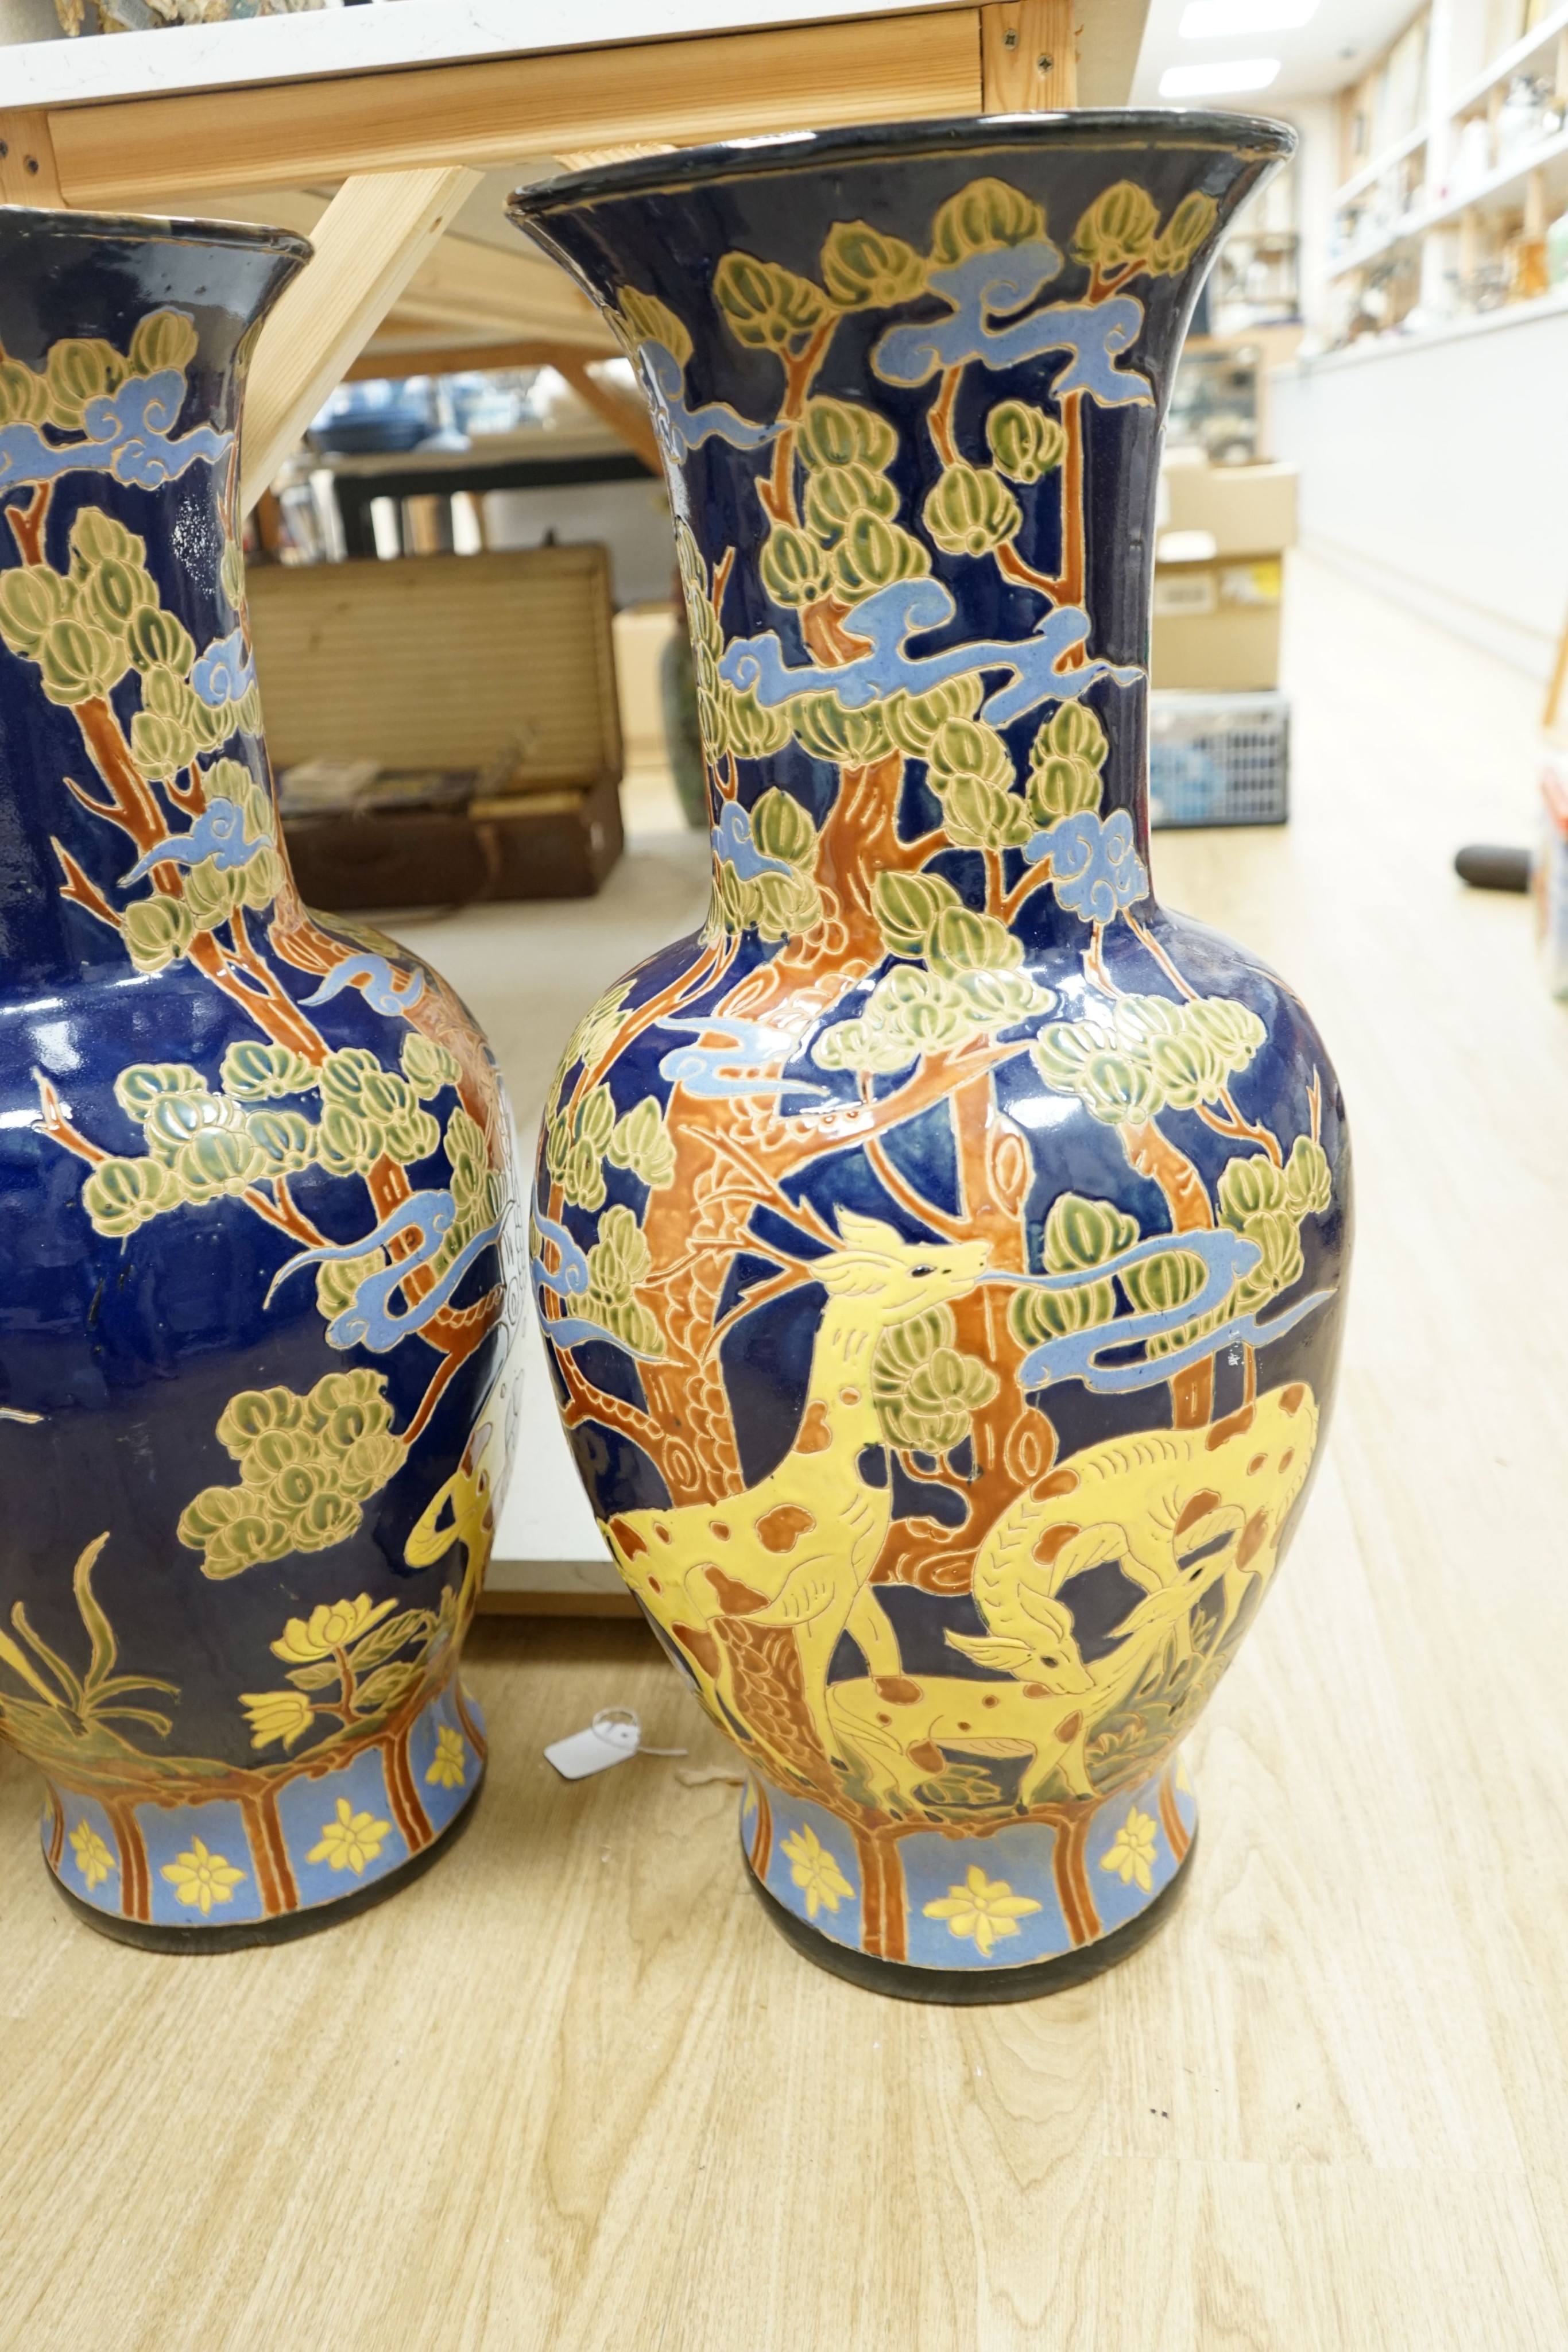 A pair of large Chinese polychrome pottery baluster vases, 82 cm